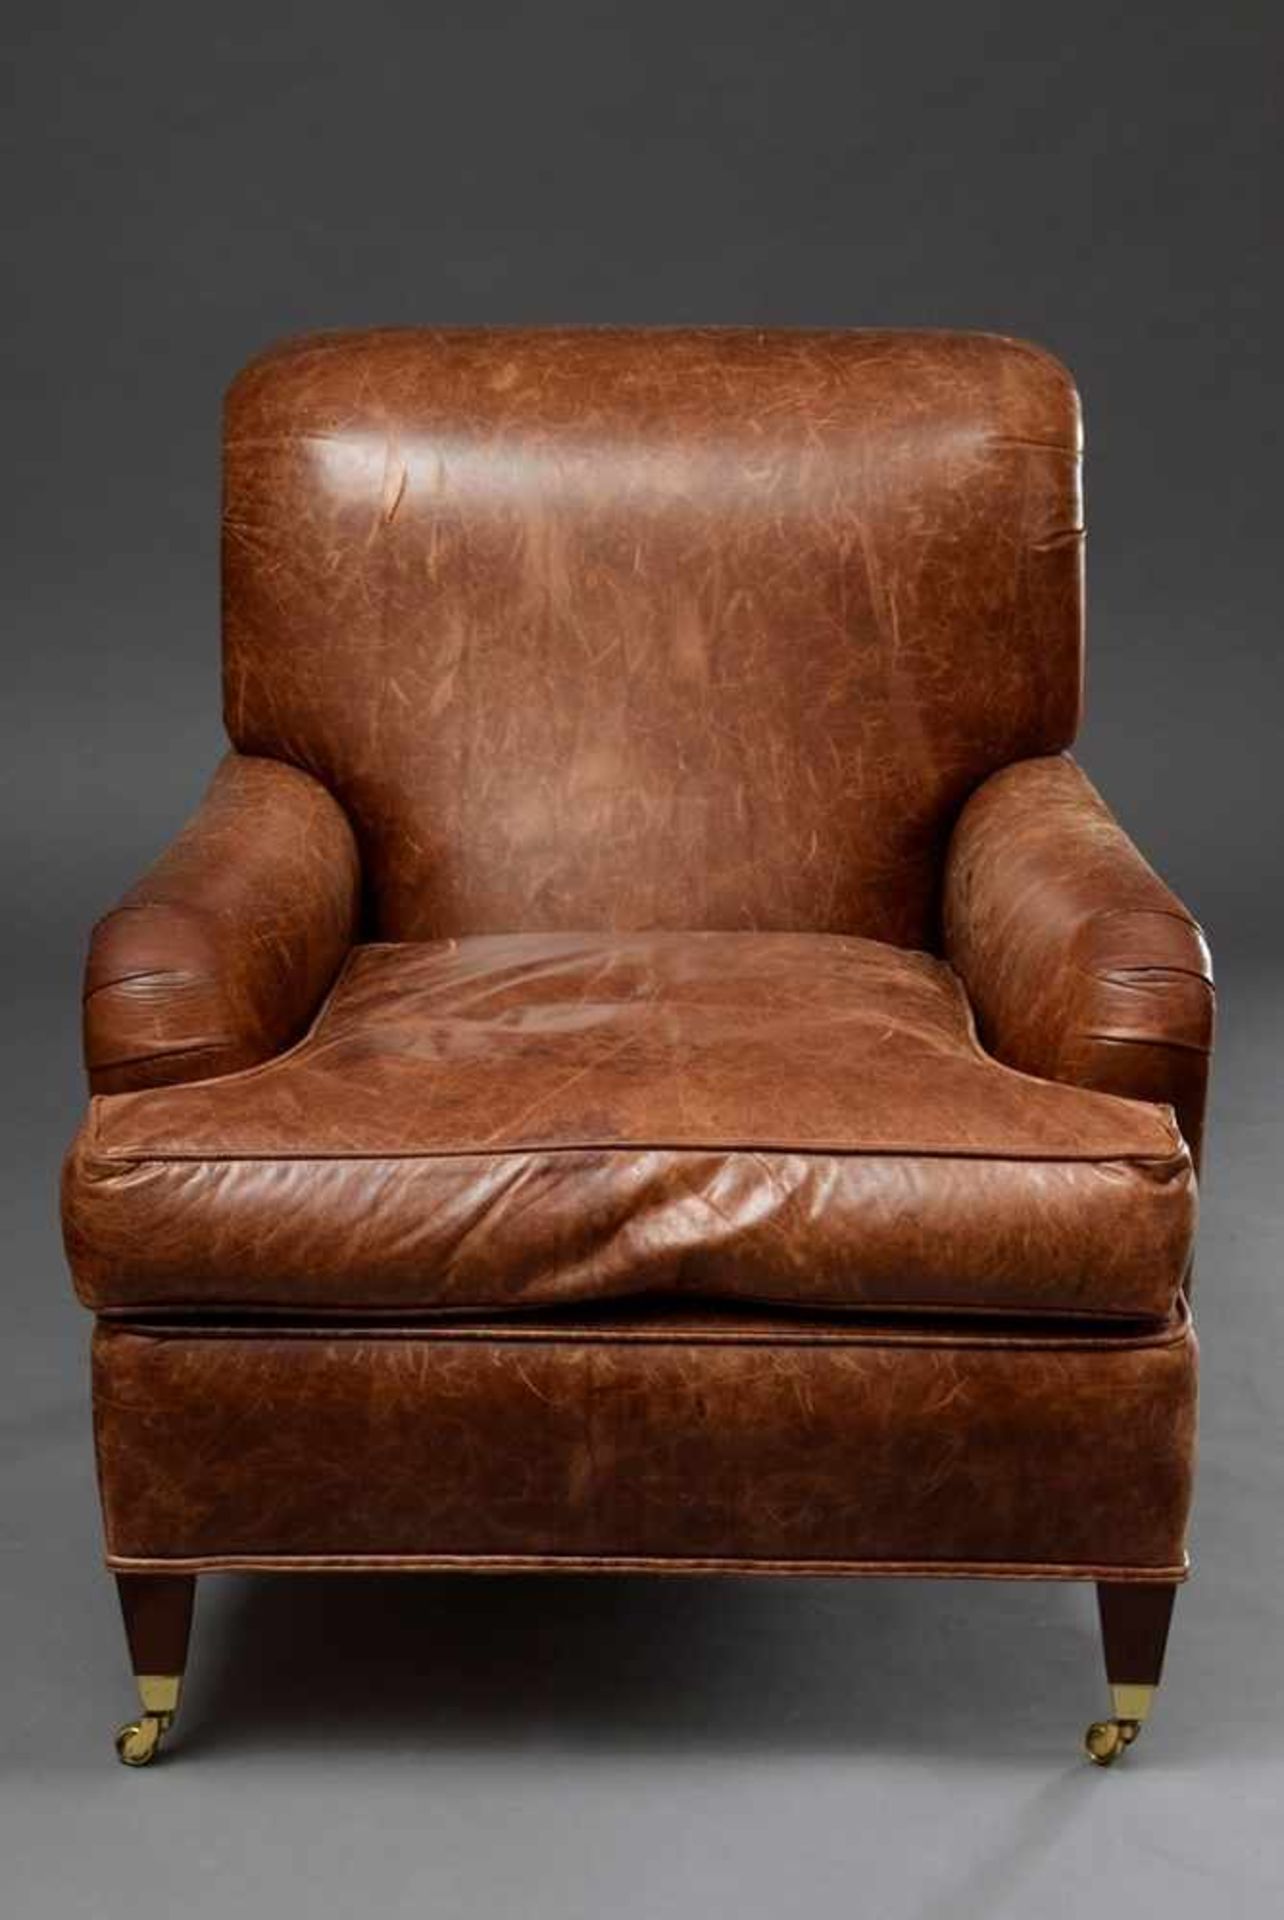 Brown leather armchair with volute handles in art deco style, h. 49/85cm, acquired by Hans Otto - Image 2 of 4